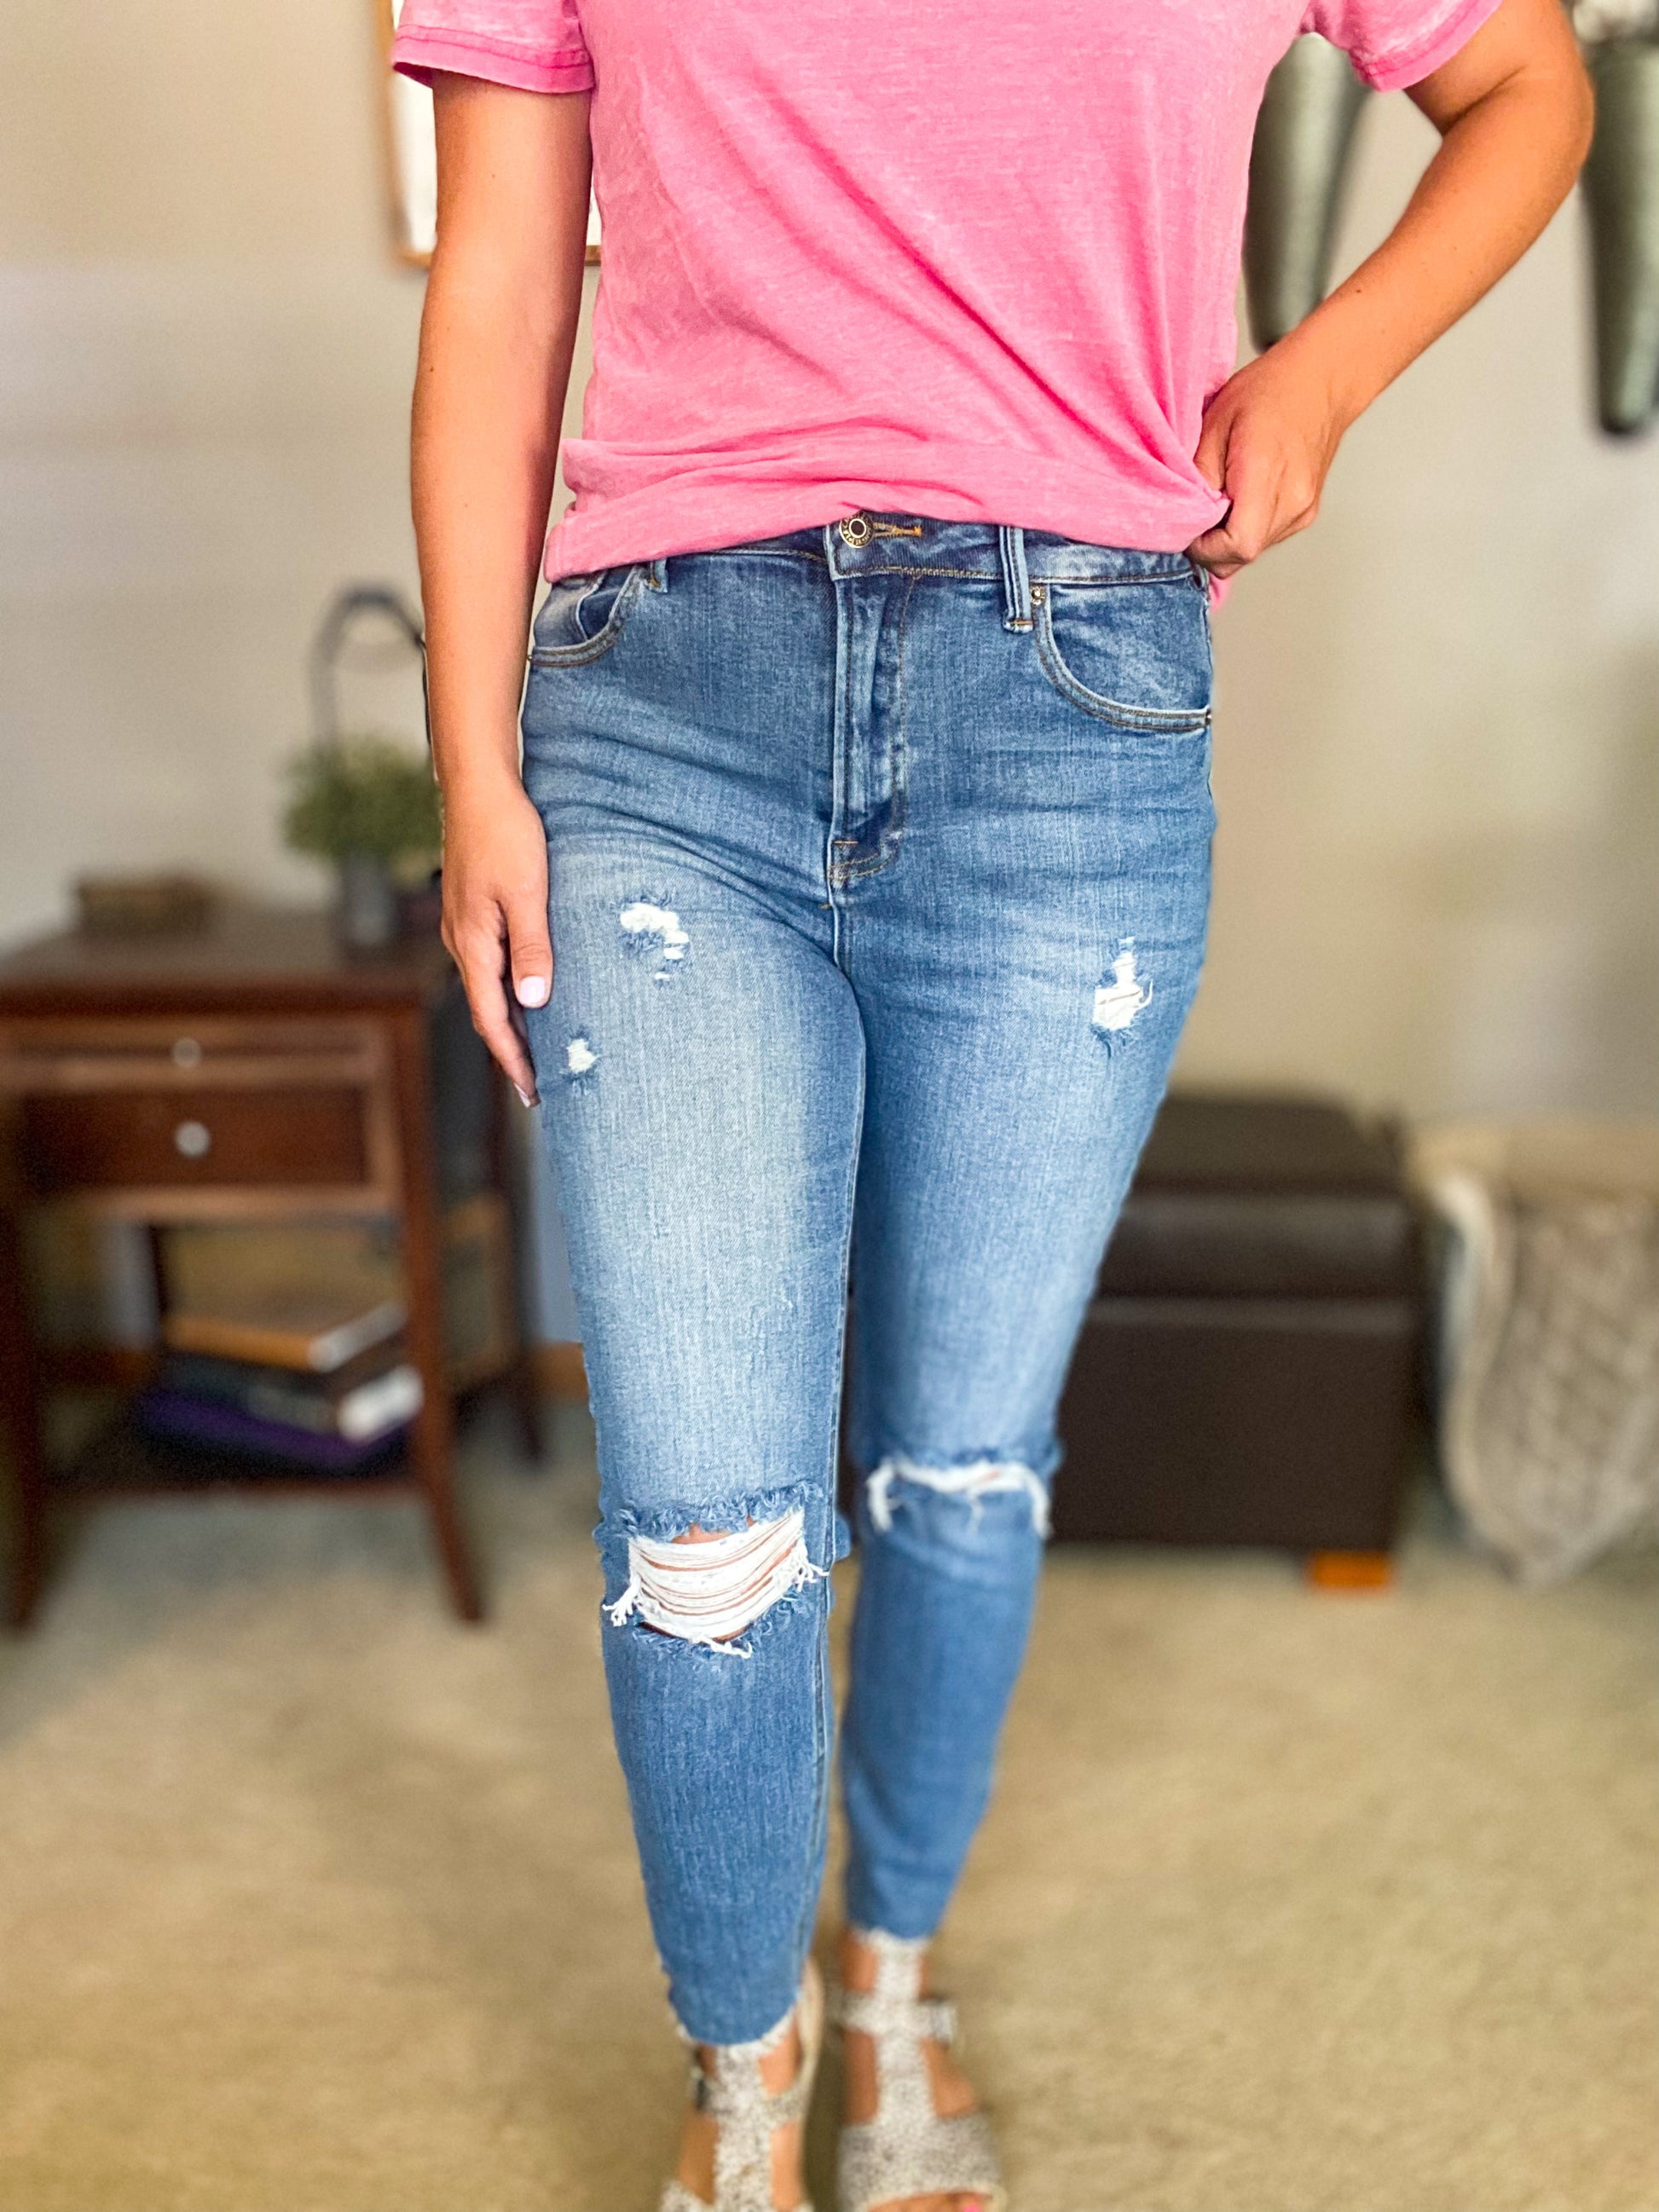 Women's Jeans - High Rise, Relaxed Fit, Skinny & More